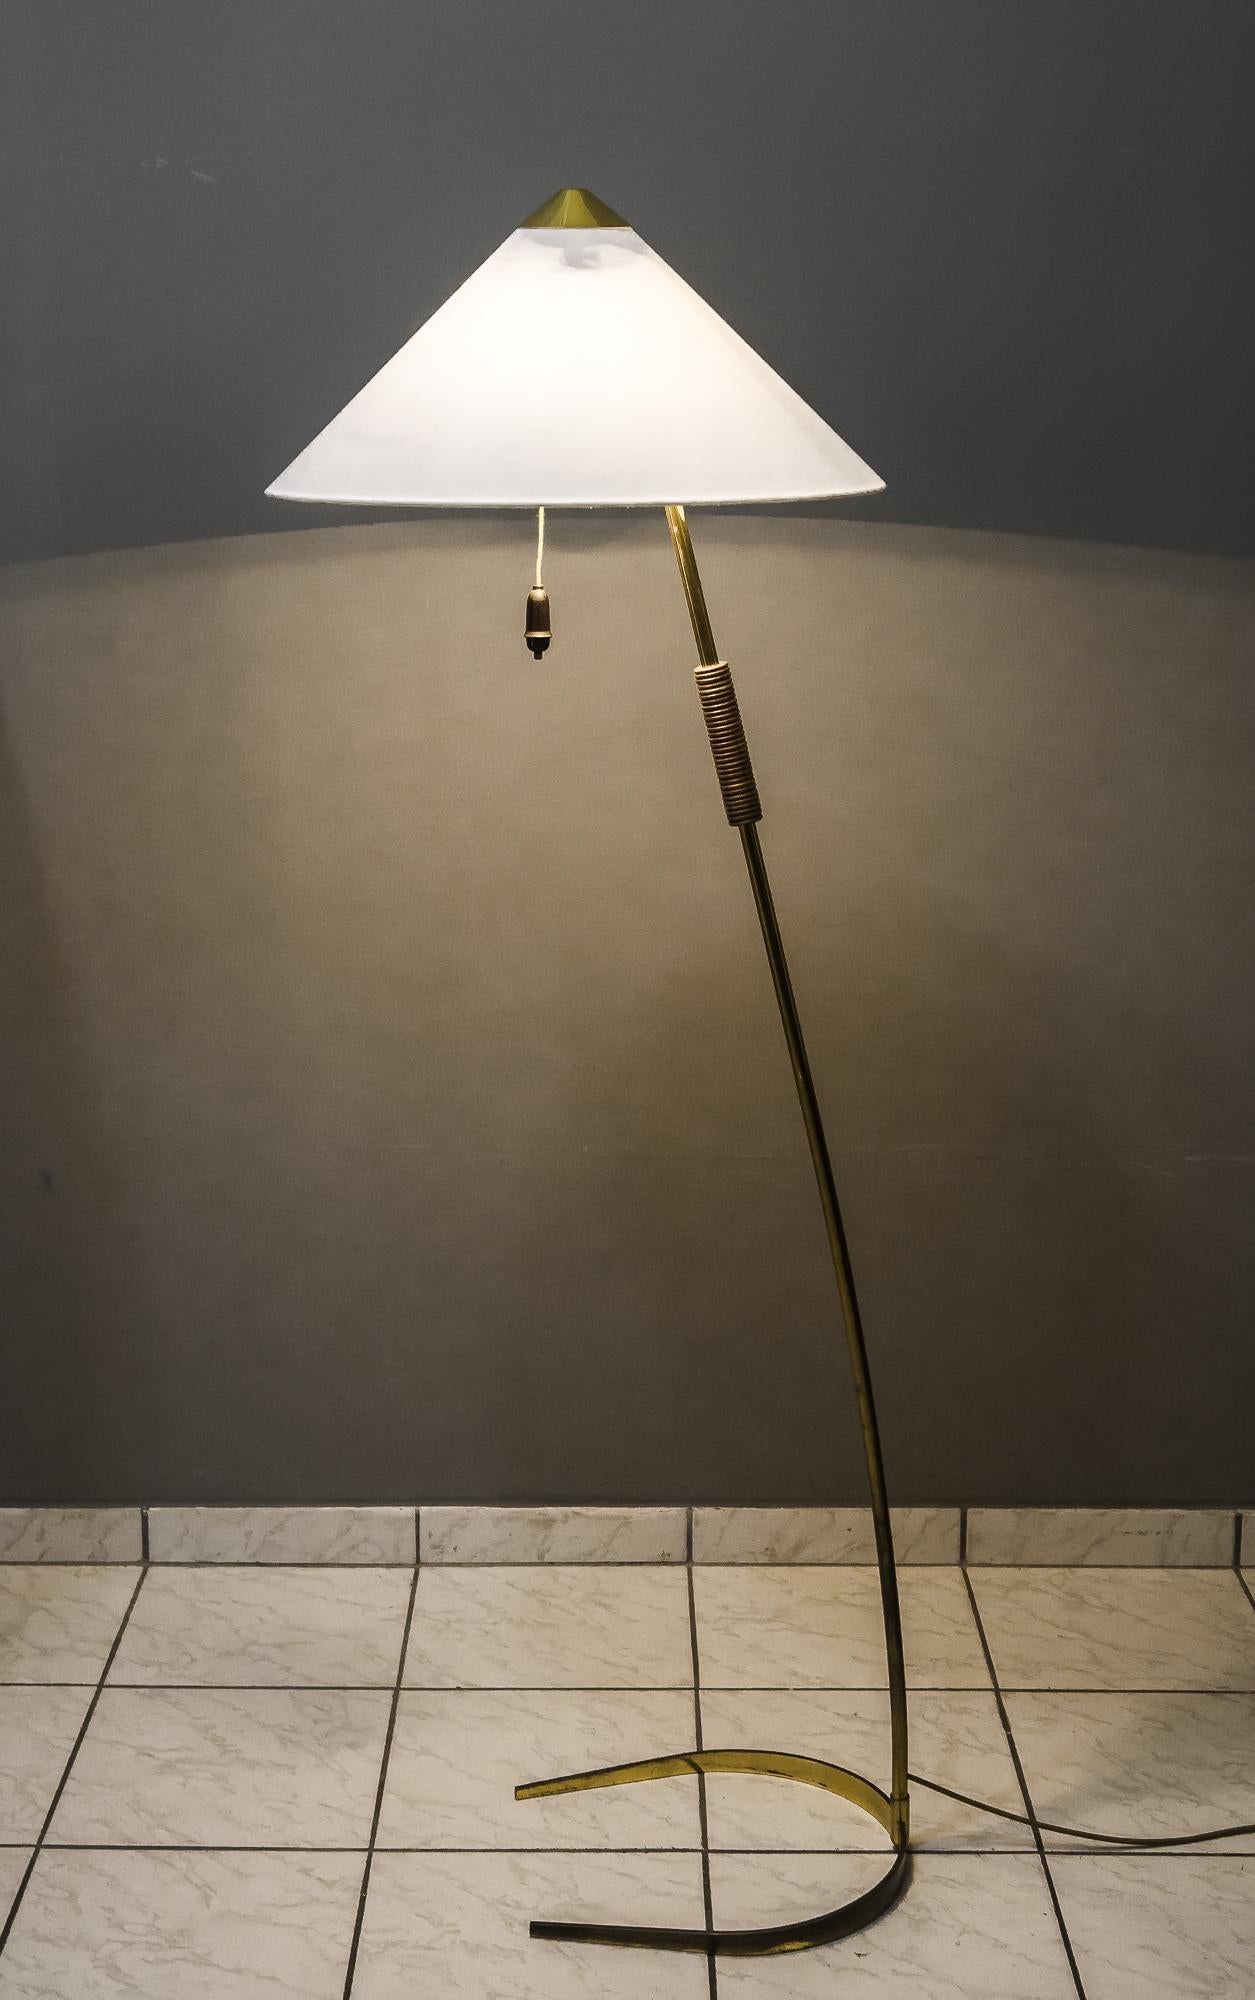 Mid-20th Century Rupert Nikoll Floor Lamp with Wood Handle, circa 1950s For Sale